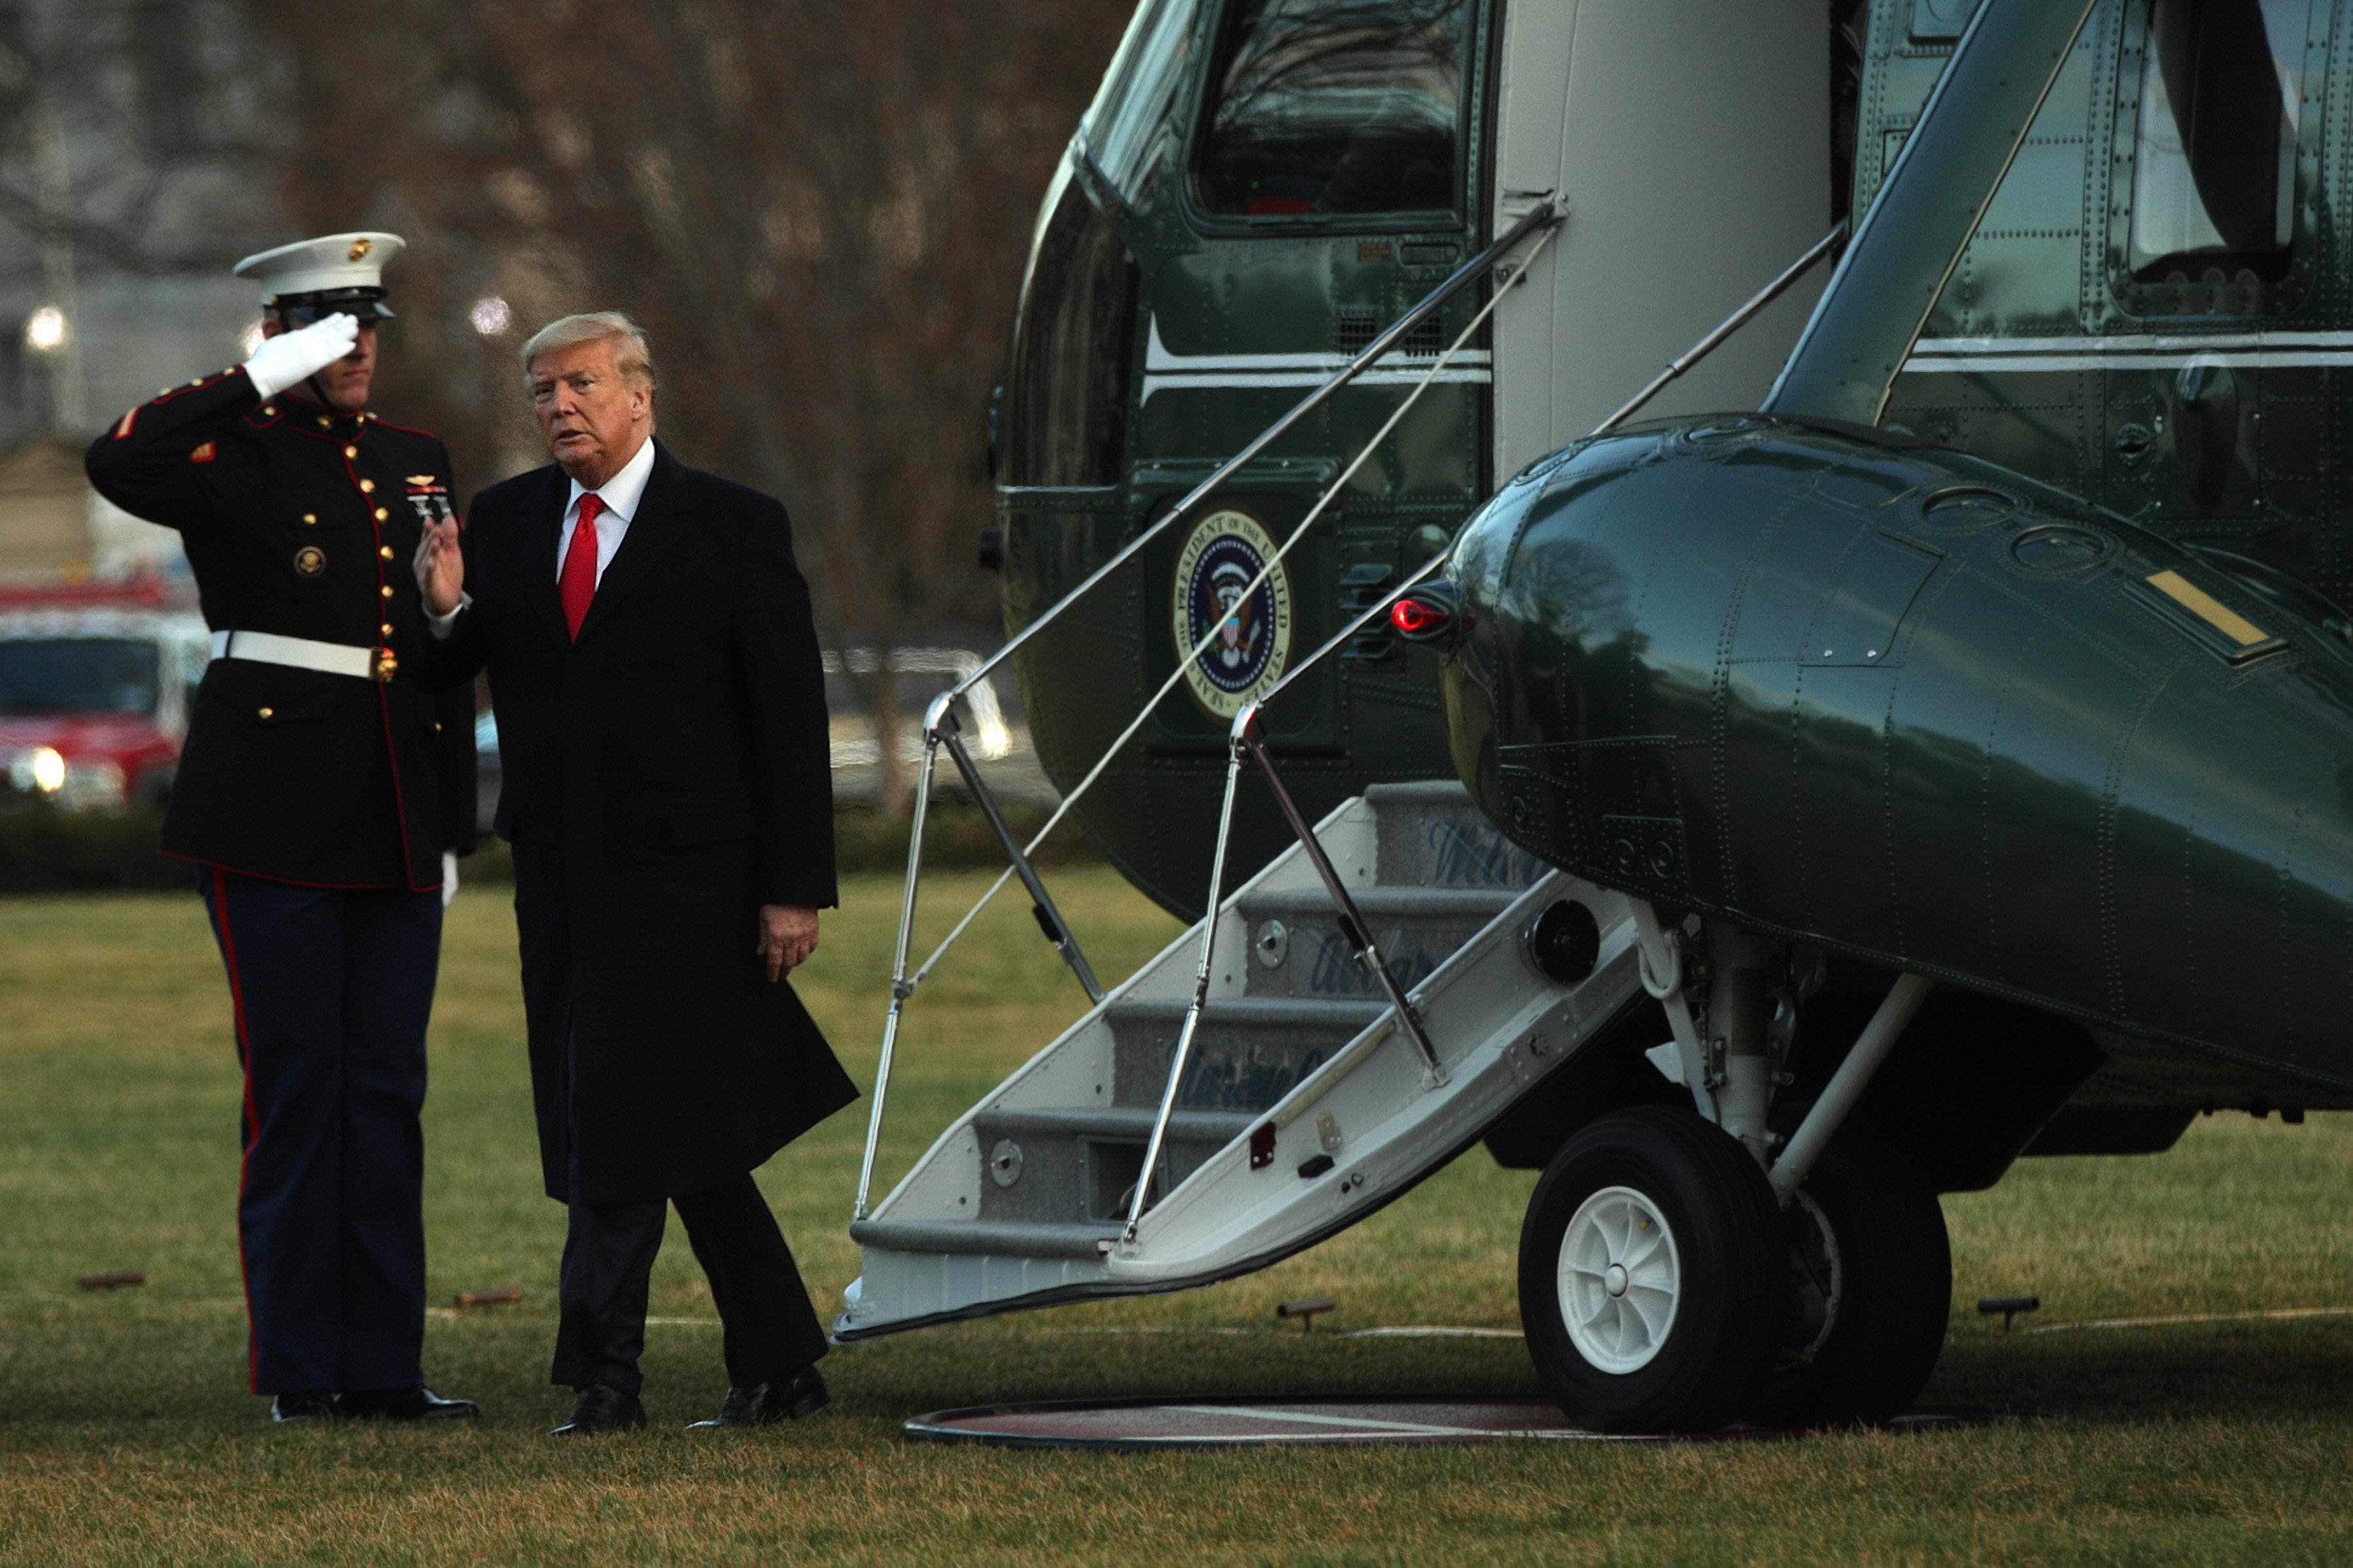 WASHINGTON, DC - FEBRUARY 07: U.S. President Donald Trump gets off from the Marine One after he landed at the South Lawn of the White House February 7, 2020 in Washington, DC. President Trump has returned from speaking at a “North Carolina Opportunity Now” summit in Charlotte, North Carolina. (Photo by Alex Wong/Getty Images)